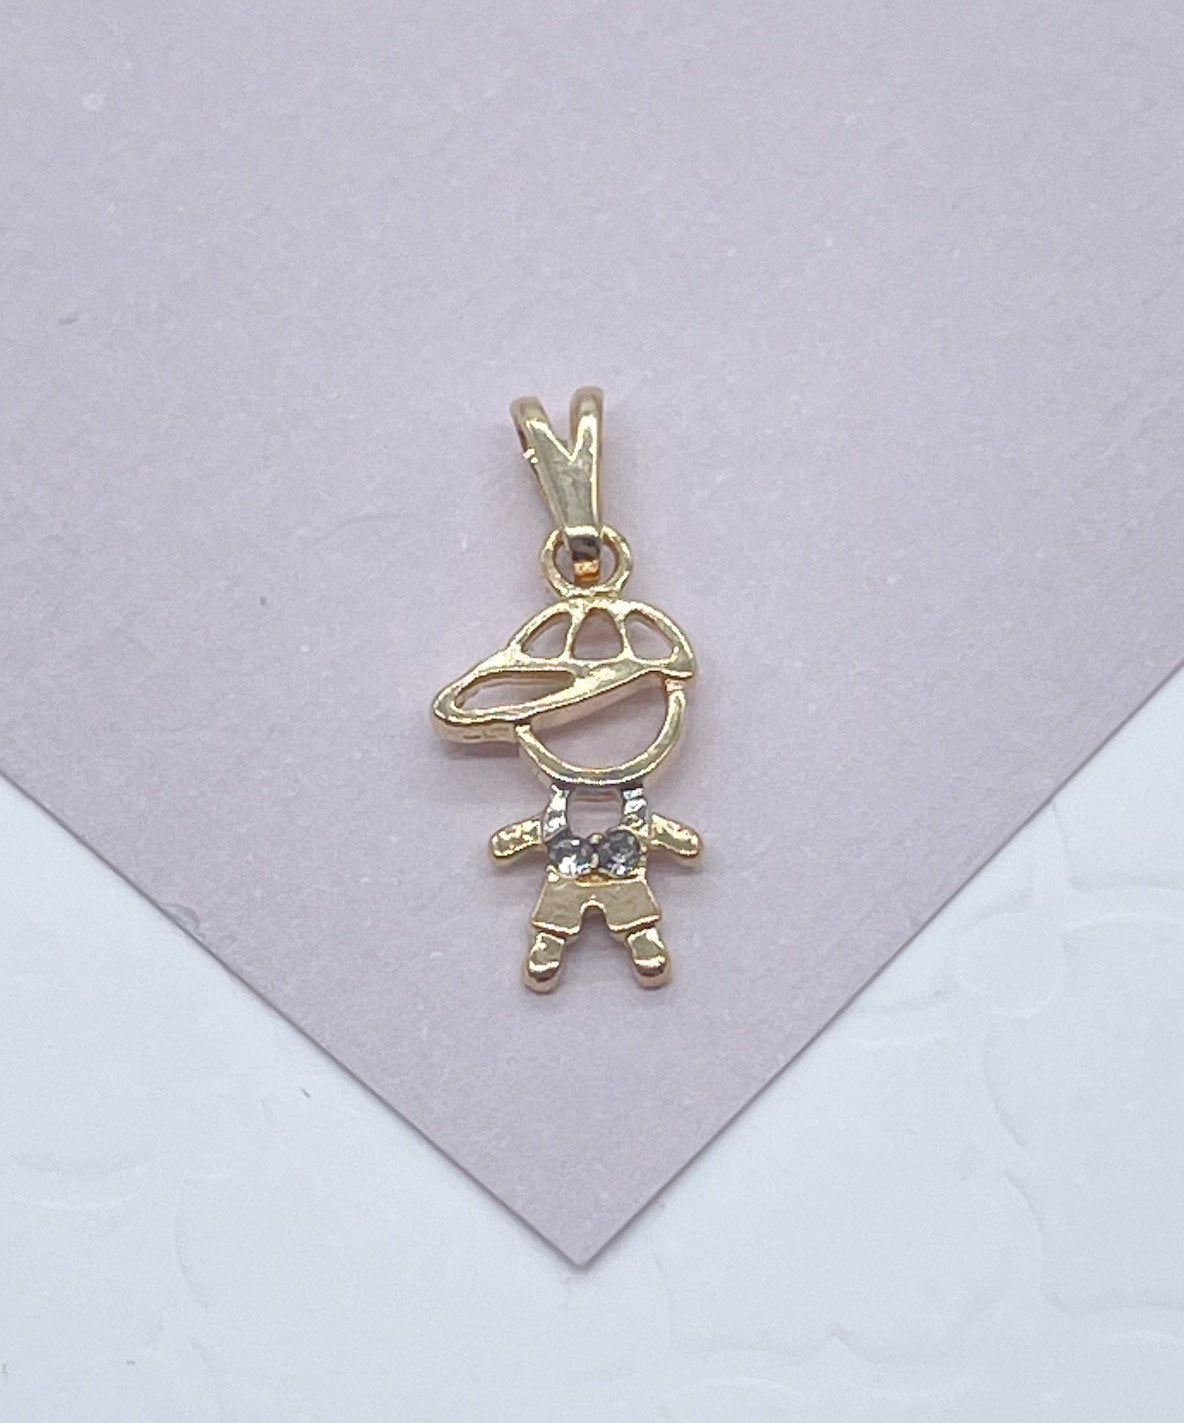 18k Gold Filled Kids Charms Boy in a Hat or Girl Featuring Cubic Zirconia   and Jewelry Supplies Family Jewelry  Mother